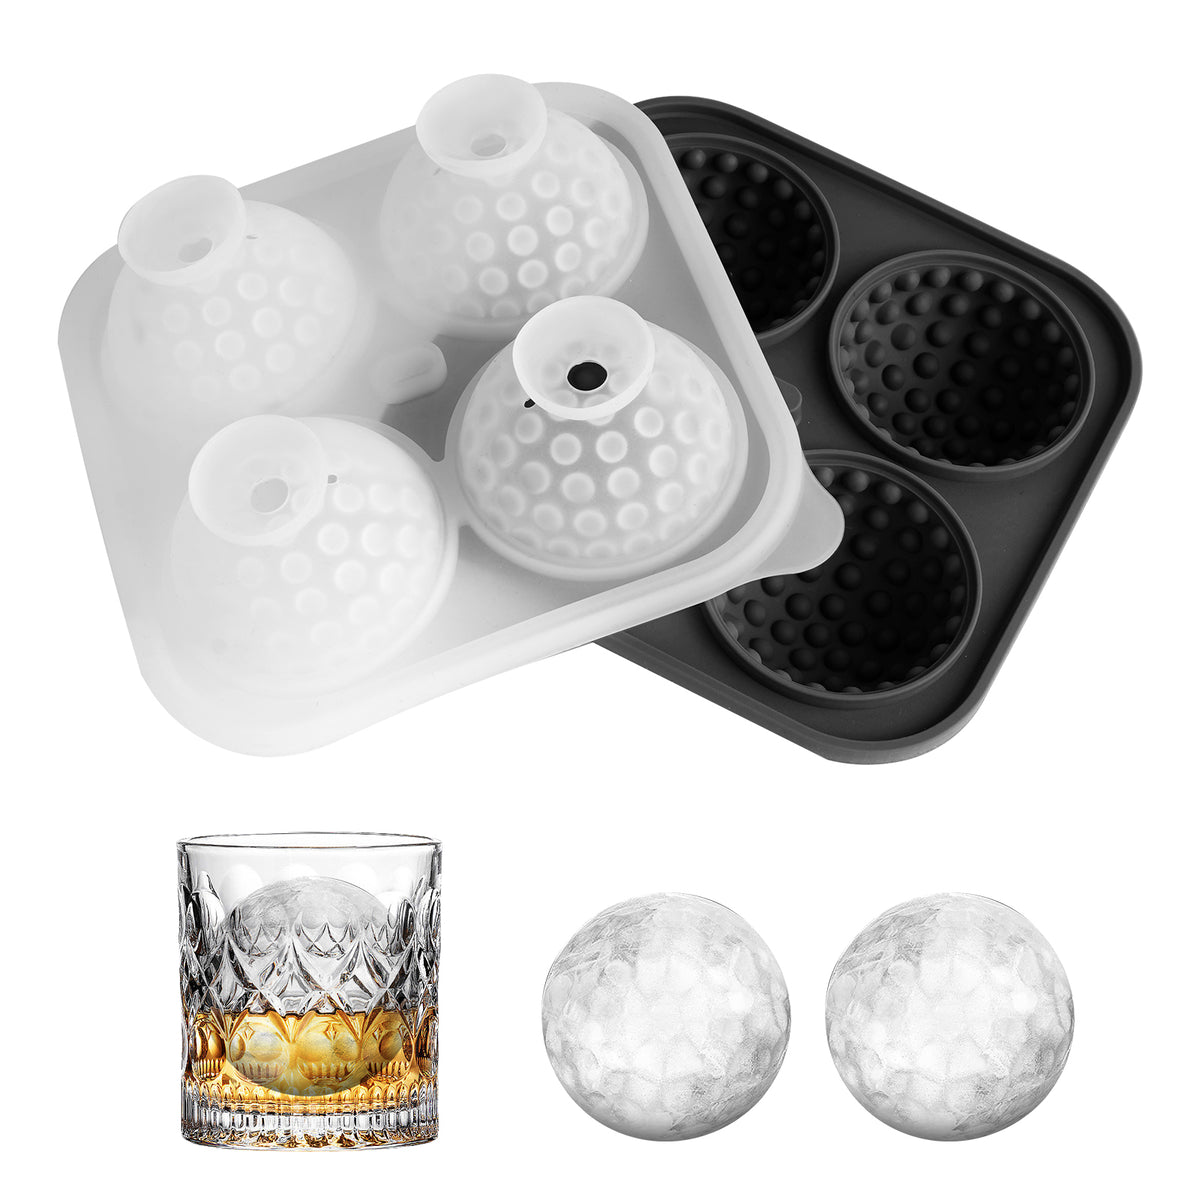 Adorila Large Silicone Ice Cube Tray, 4 Round Slots Ice Cube Trays for Freezer with Lid, Leak-Free Ice Ball Maker Mold for Whiskey, Cocktails, Bourbon (Black)